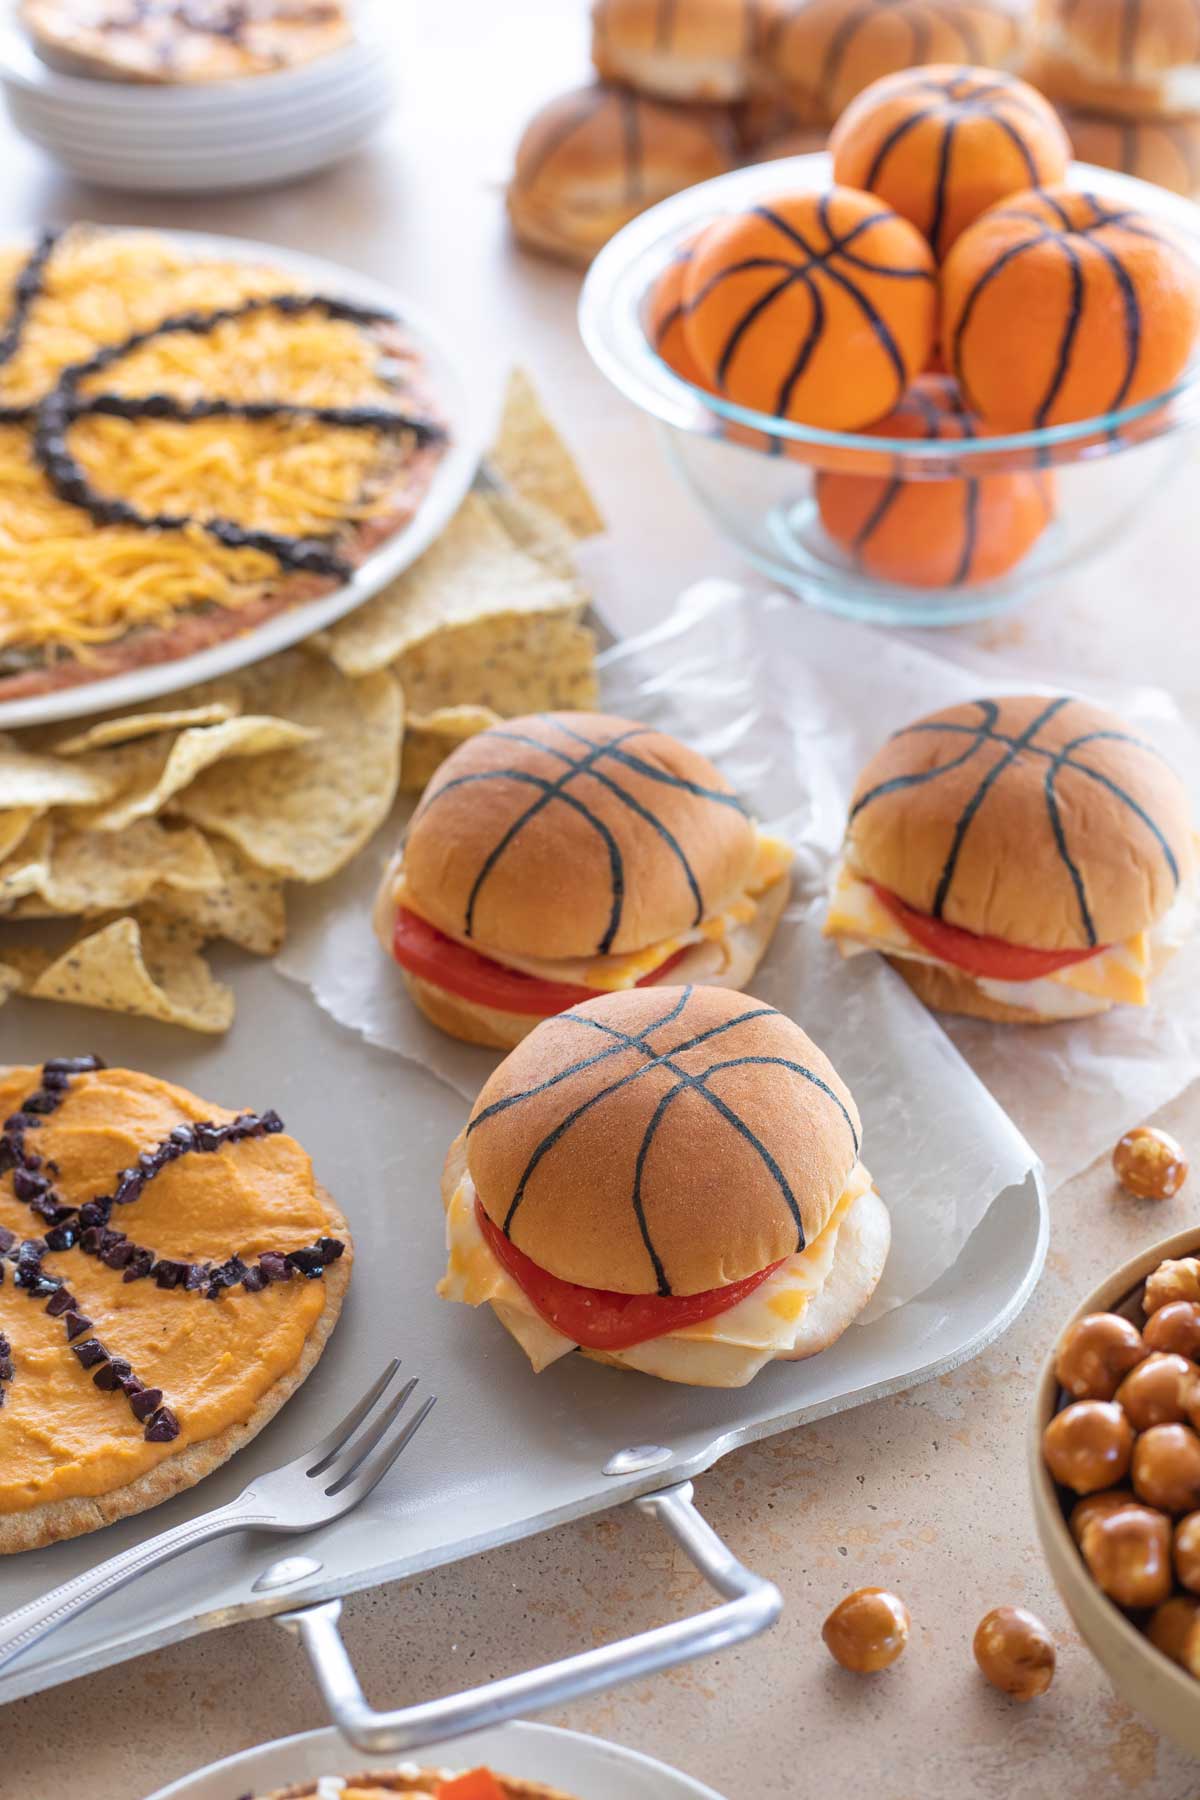 Several basketball themed recipes arranged for a party around a silver serving tray.